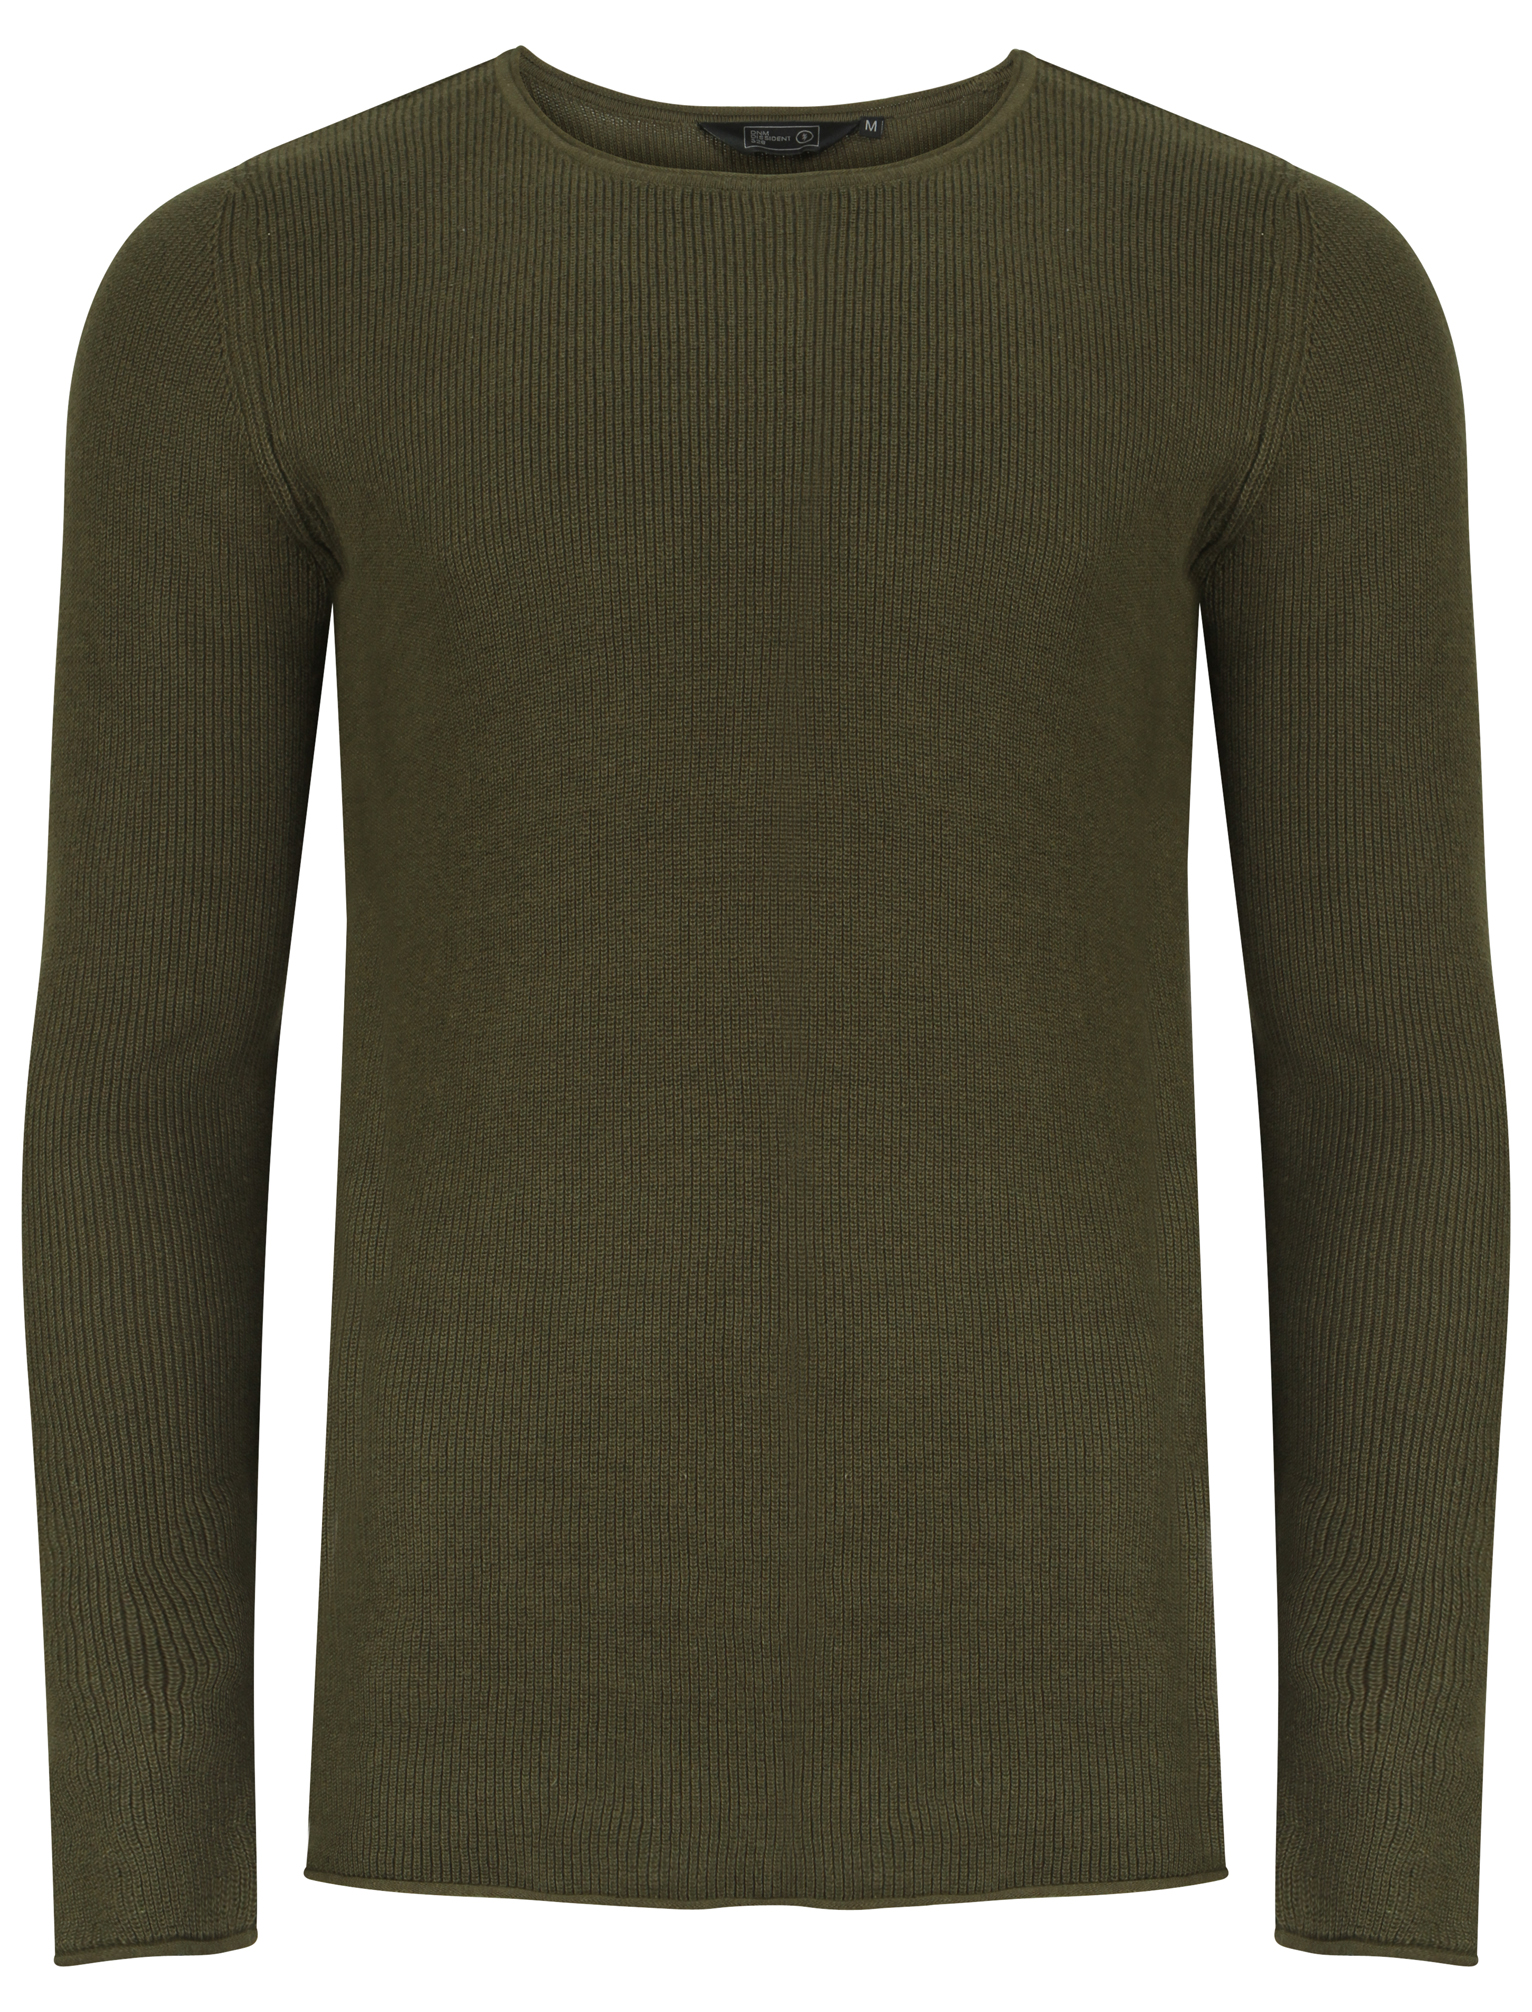 Details about   Mens Dissident Mellow Crew Neck Long Sleeve Ribbed Knitted Jumper Top Size S-XXL